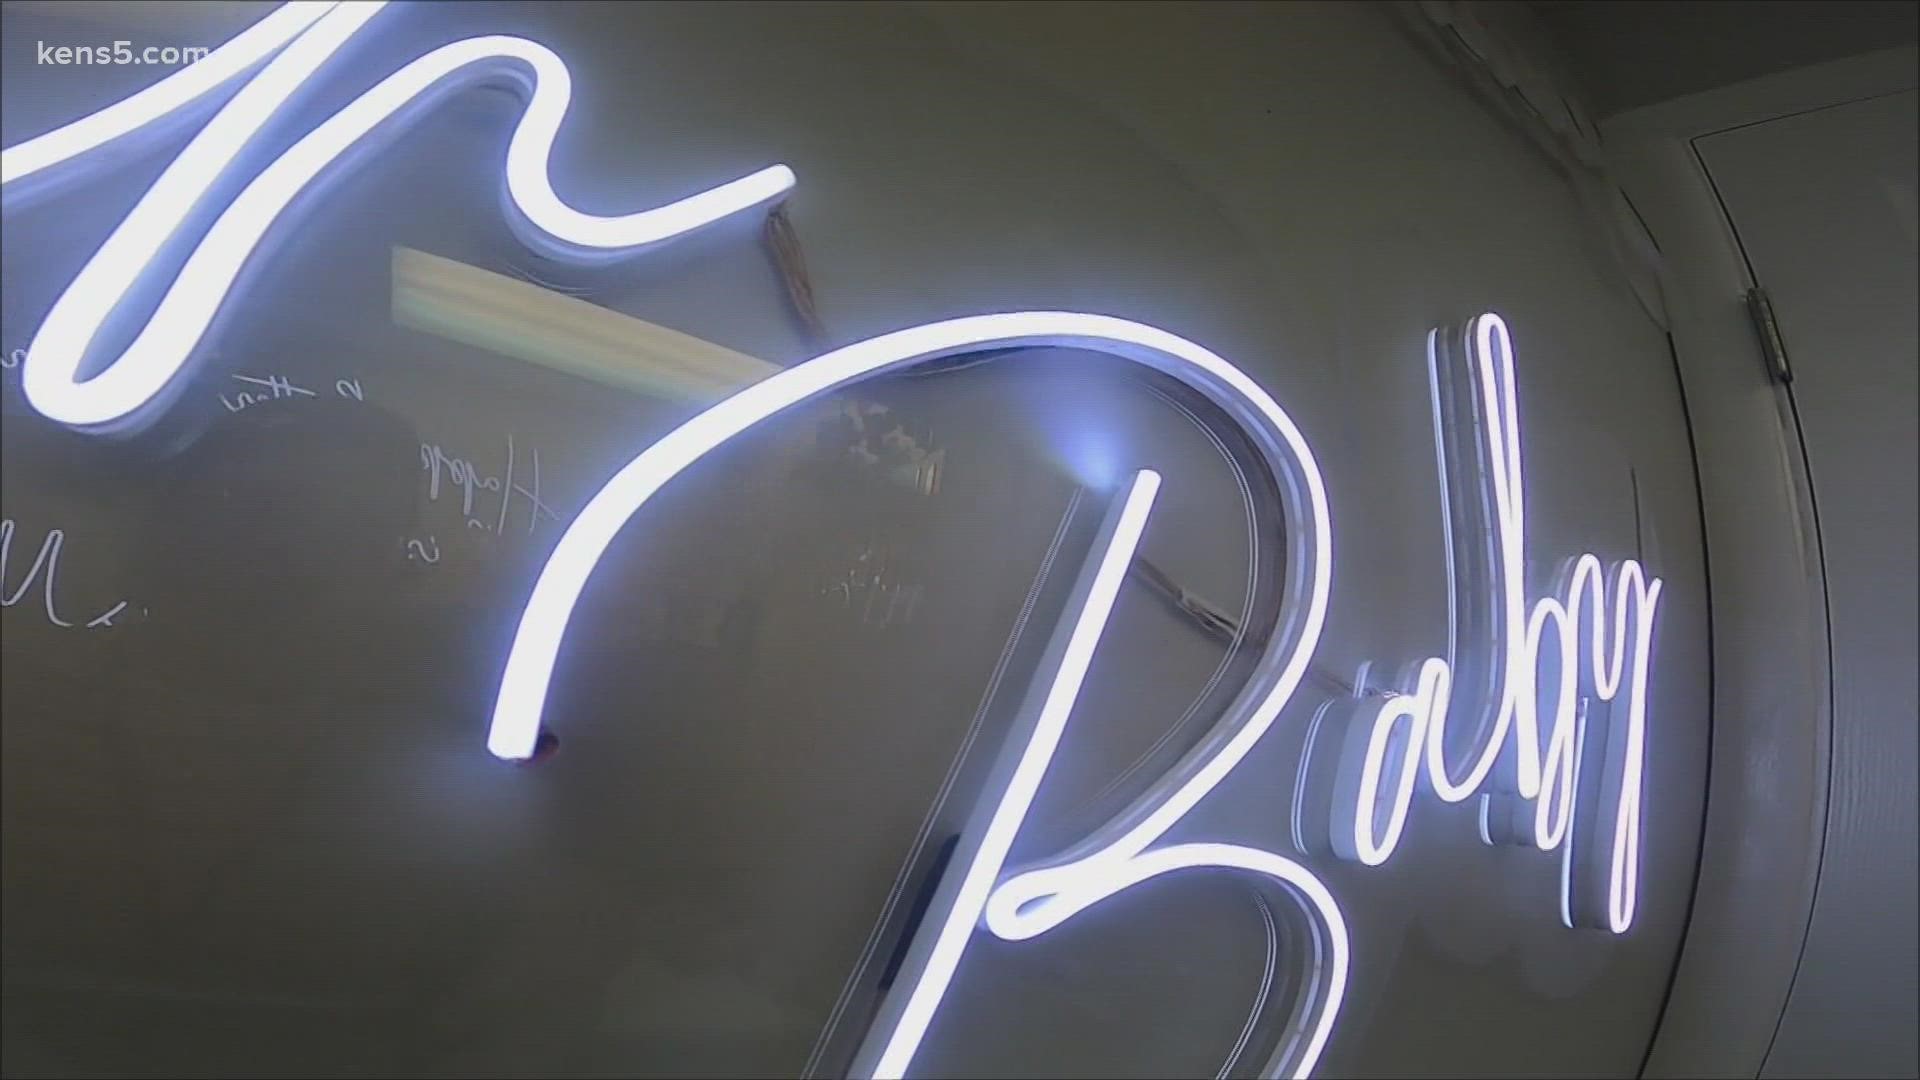 A local company makes custom-designed neon light signs in this week's Made in SA.